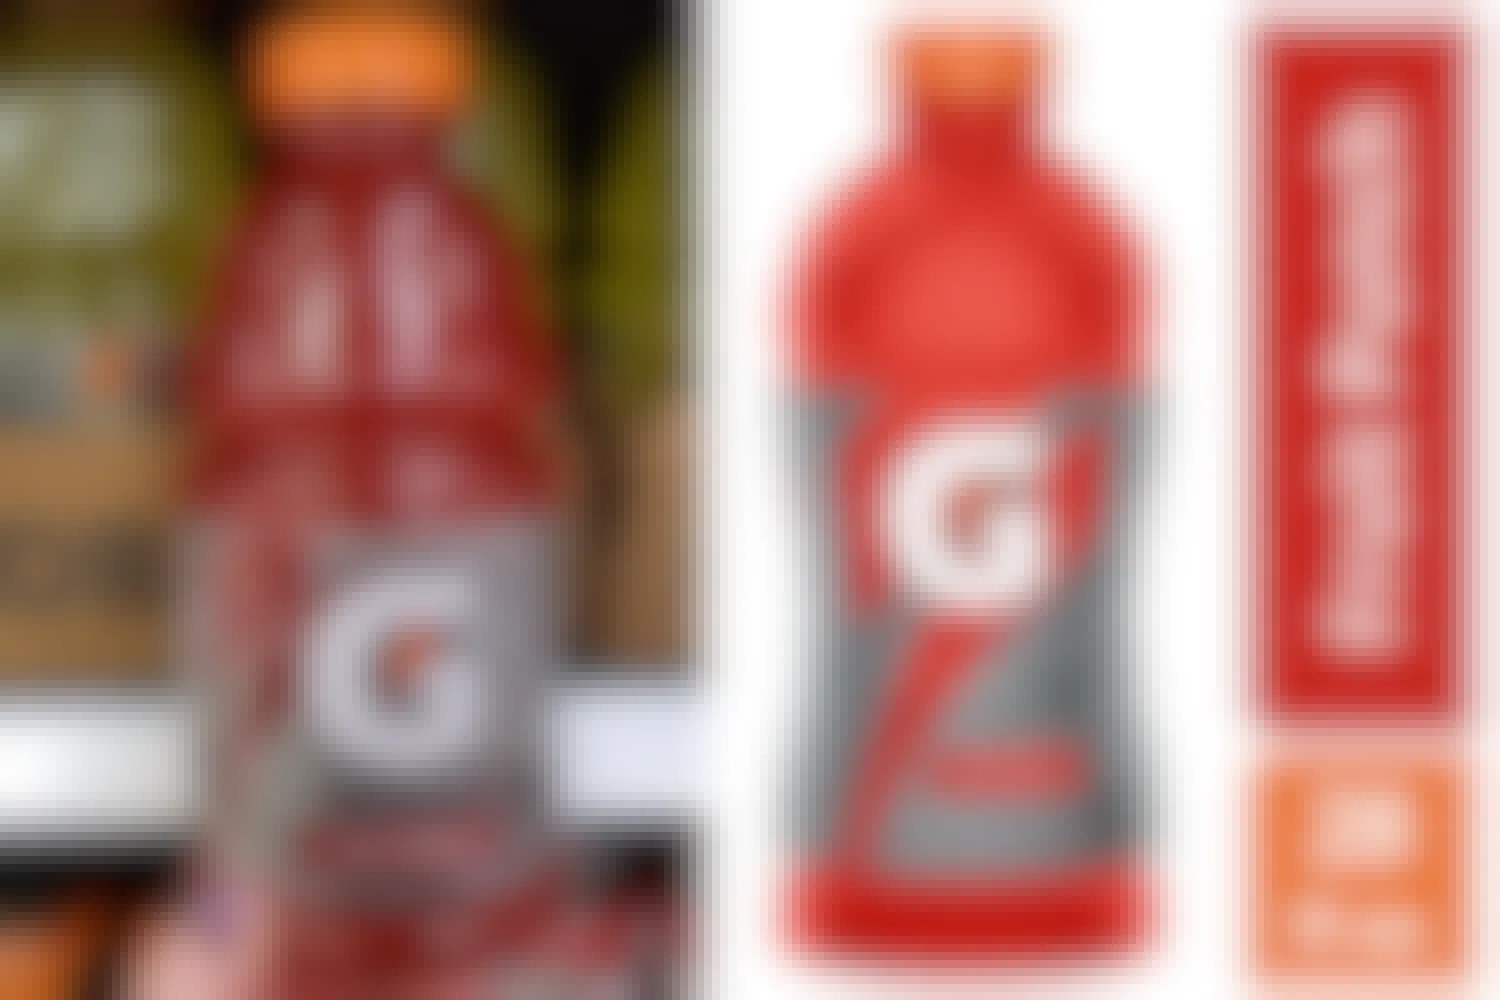 Gatorade shrinkflation with the 32 ounce bottle and the new 28 ounce bottle.